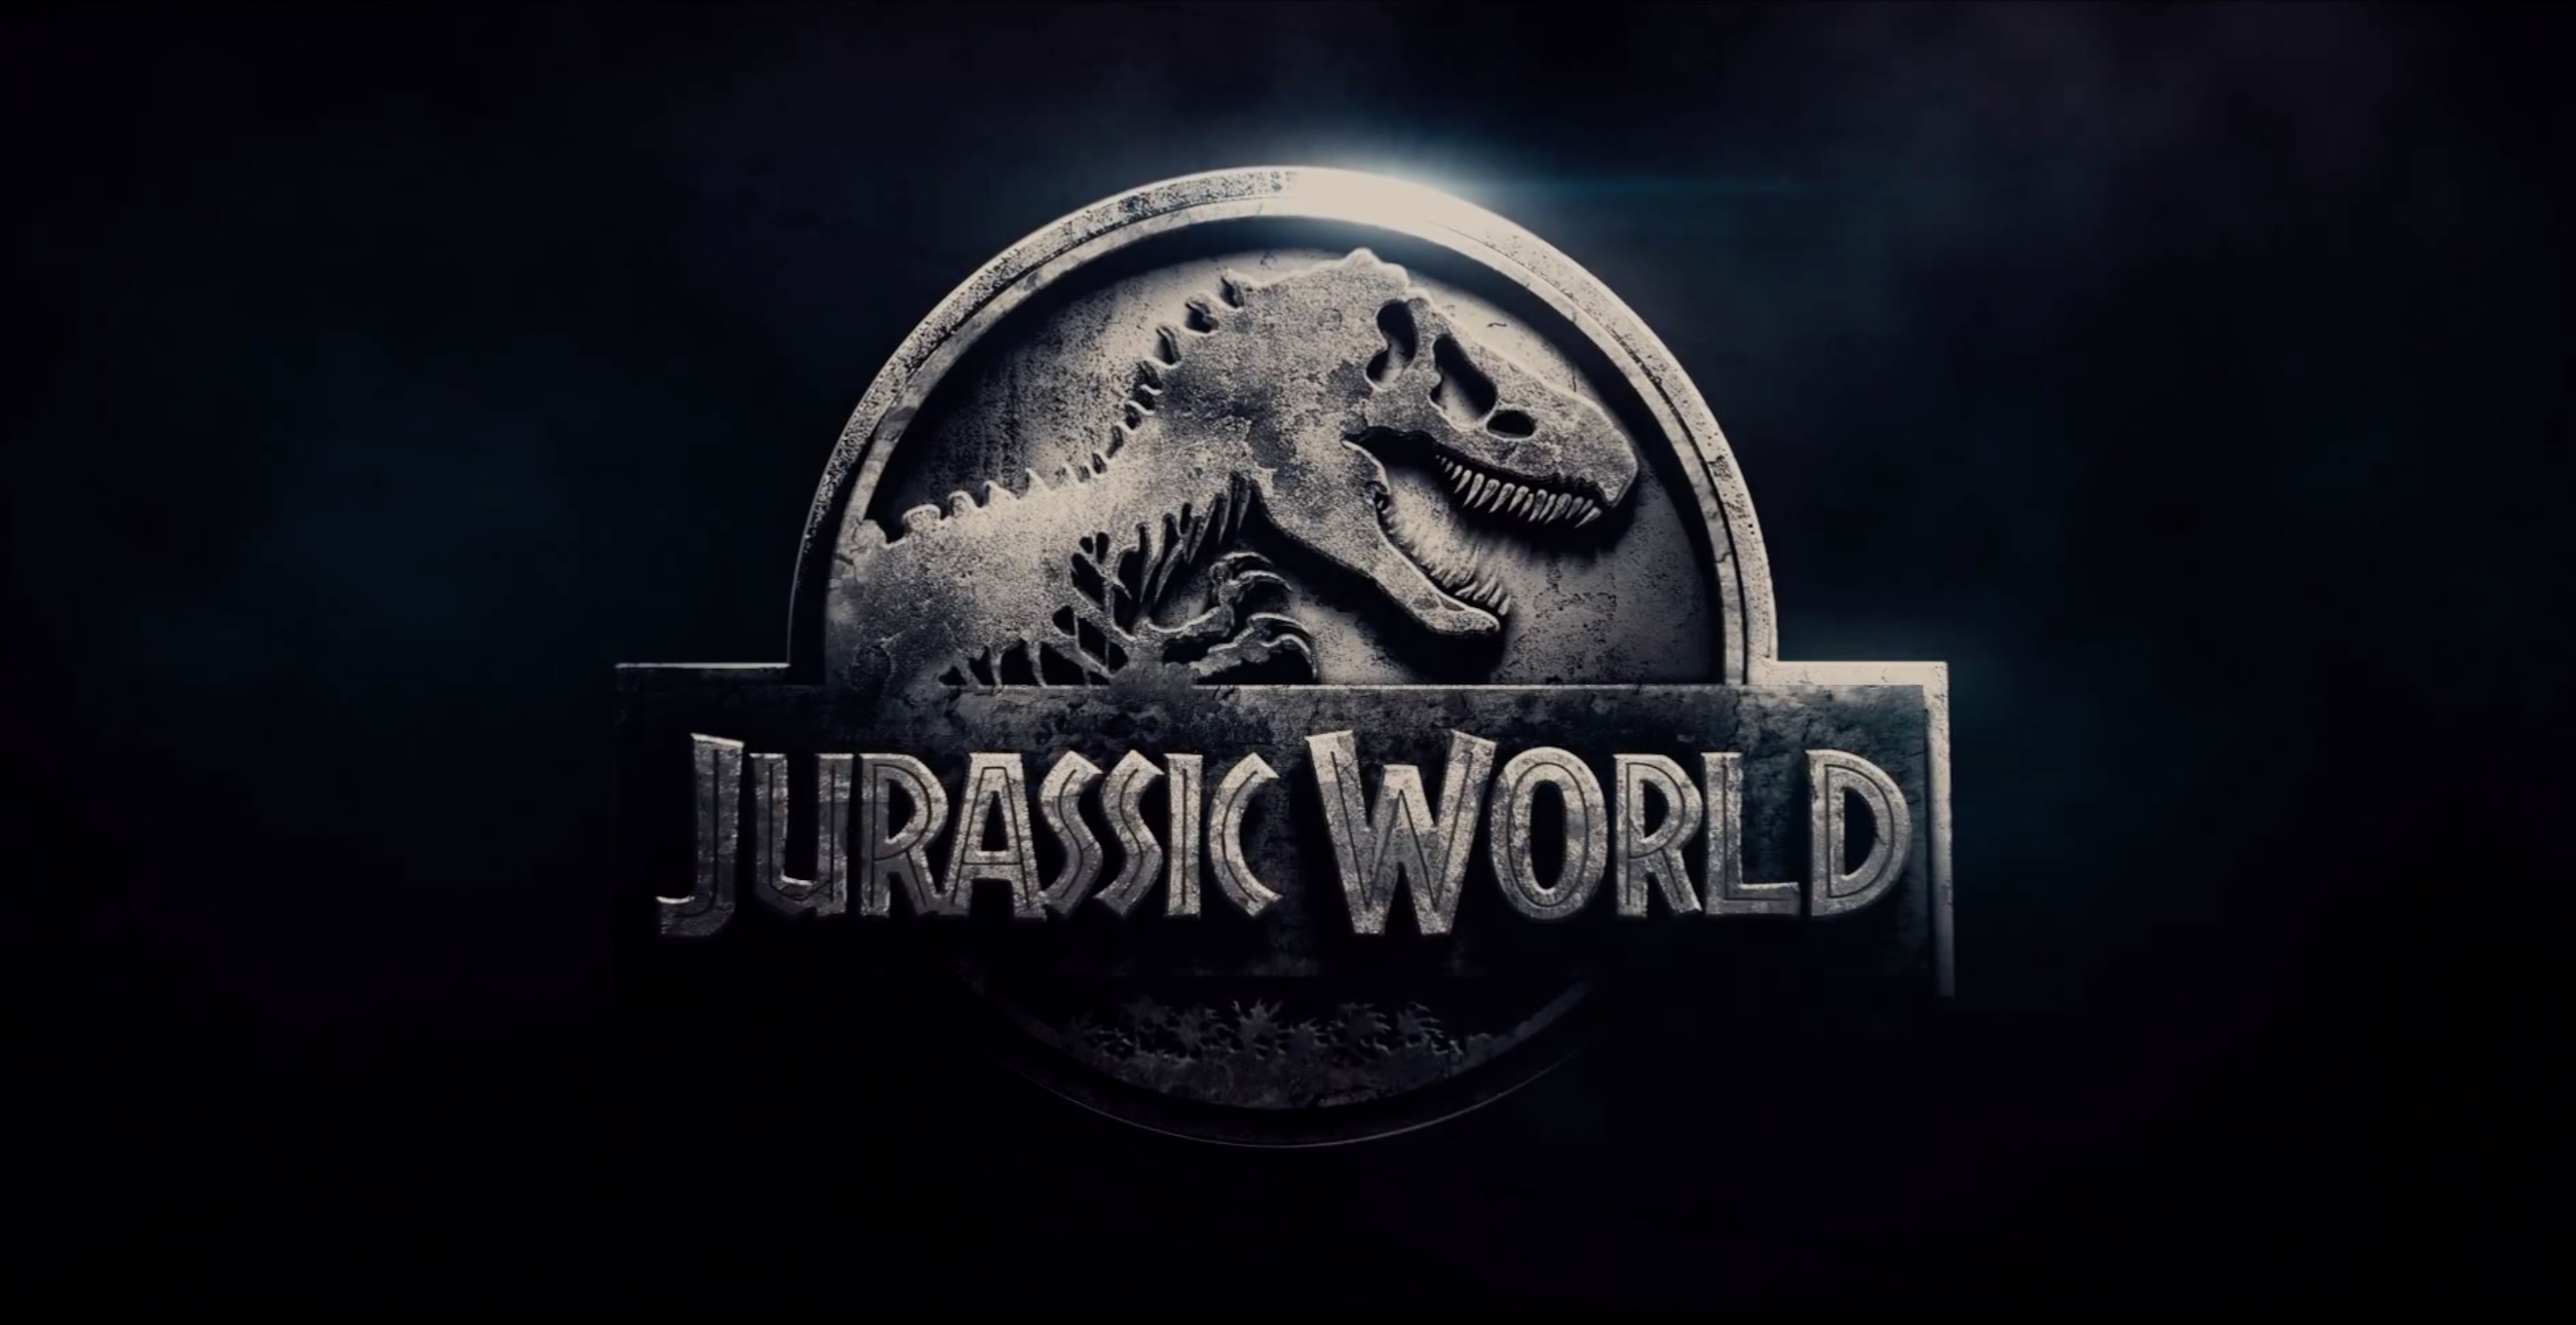 Did You Catch These Jurassic World Easter Eggs?